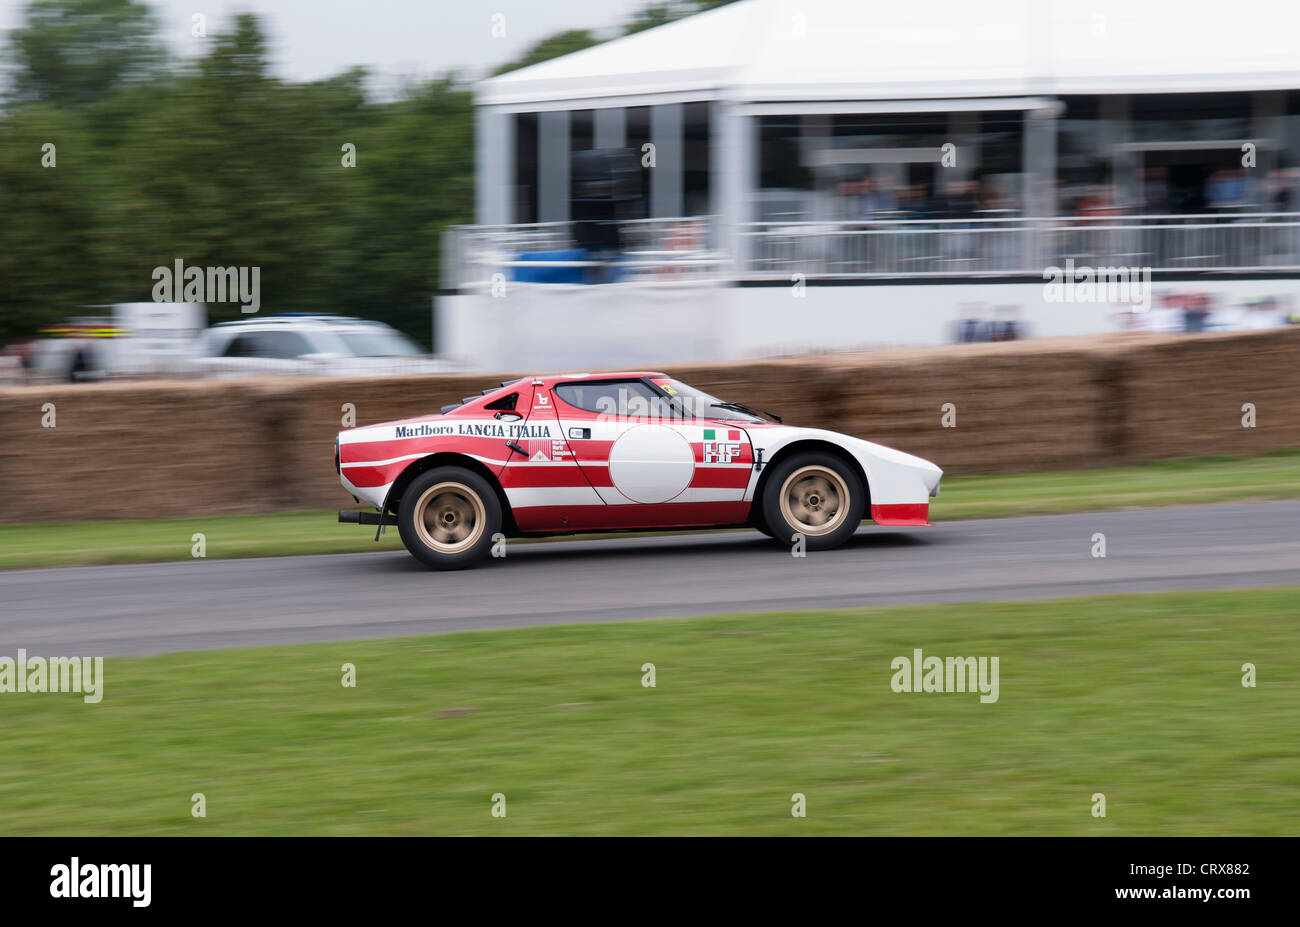 Lancia Stratos HF rally car at the Goodwood Festival of Speed 2012 ...